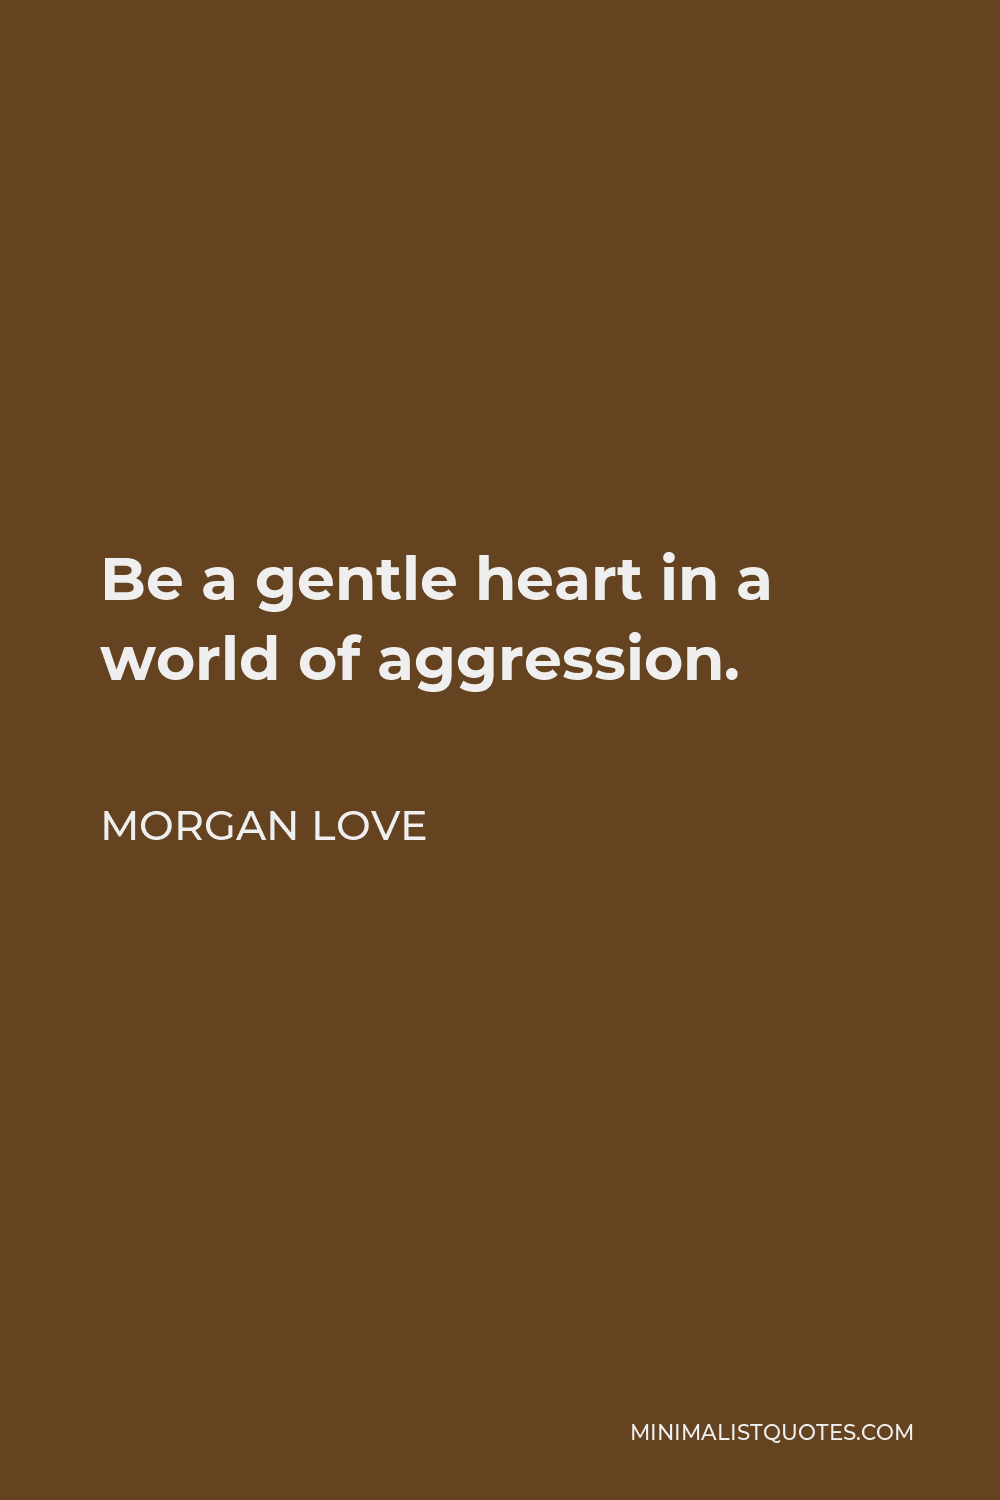 Morgan Love Quote - Be a gentle heart in a world of aggression.